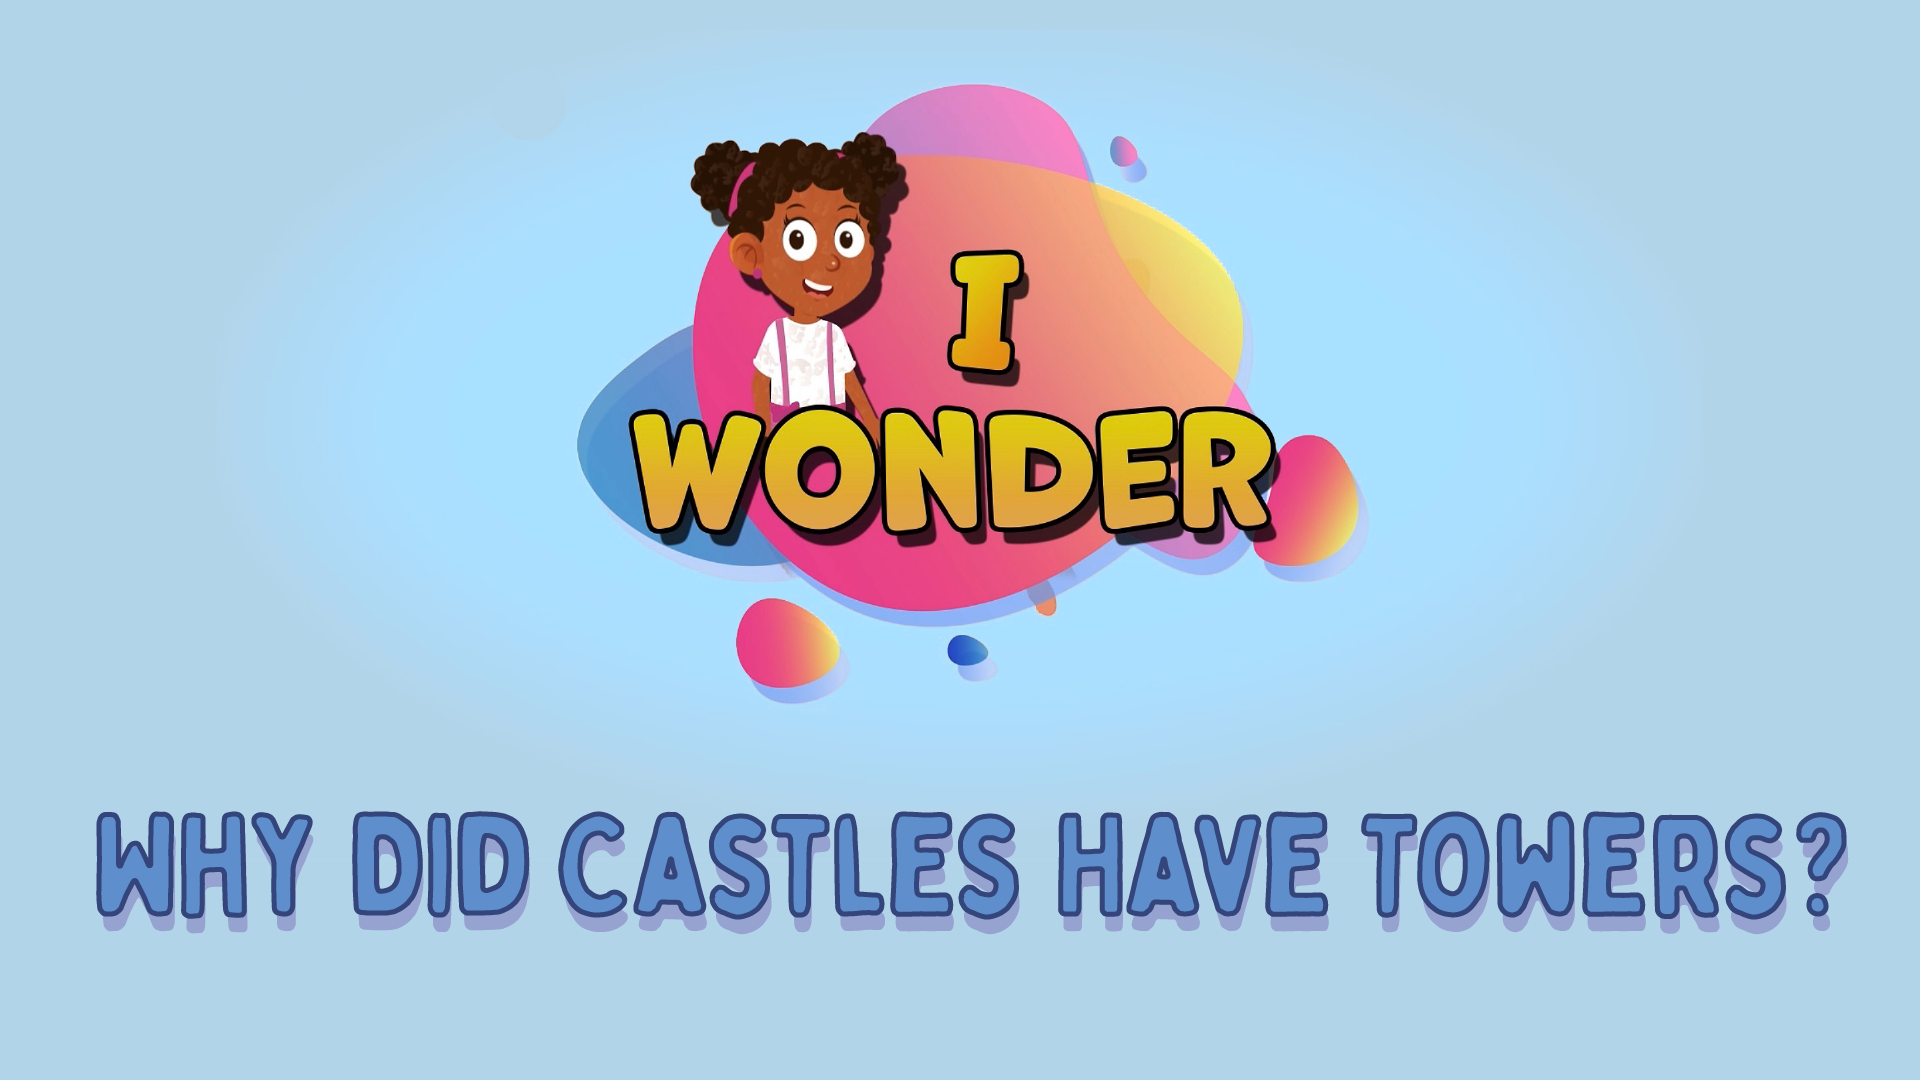 Why Did Castles Have Towers?